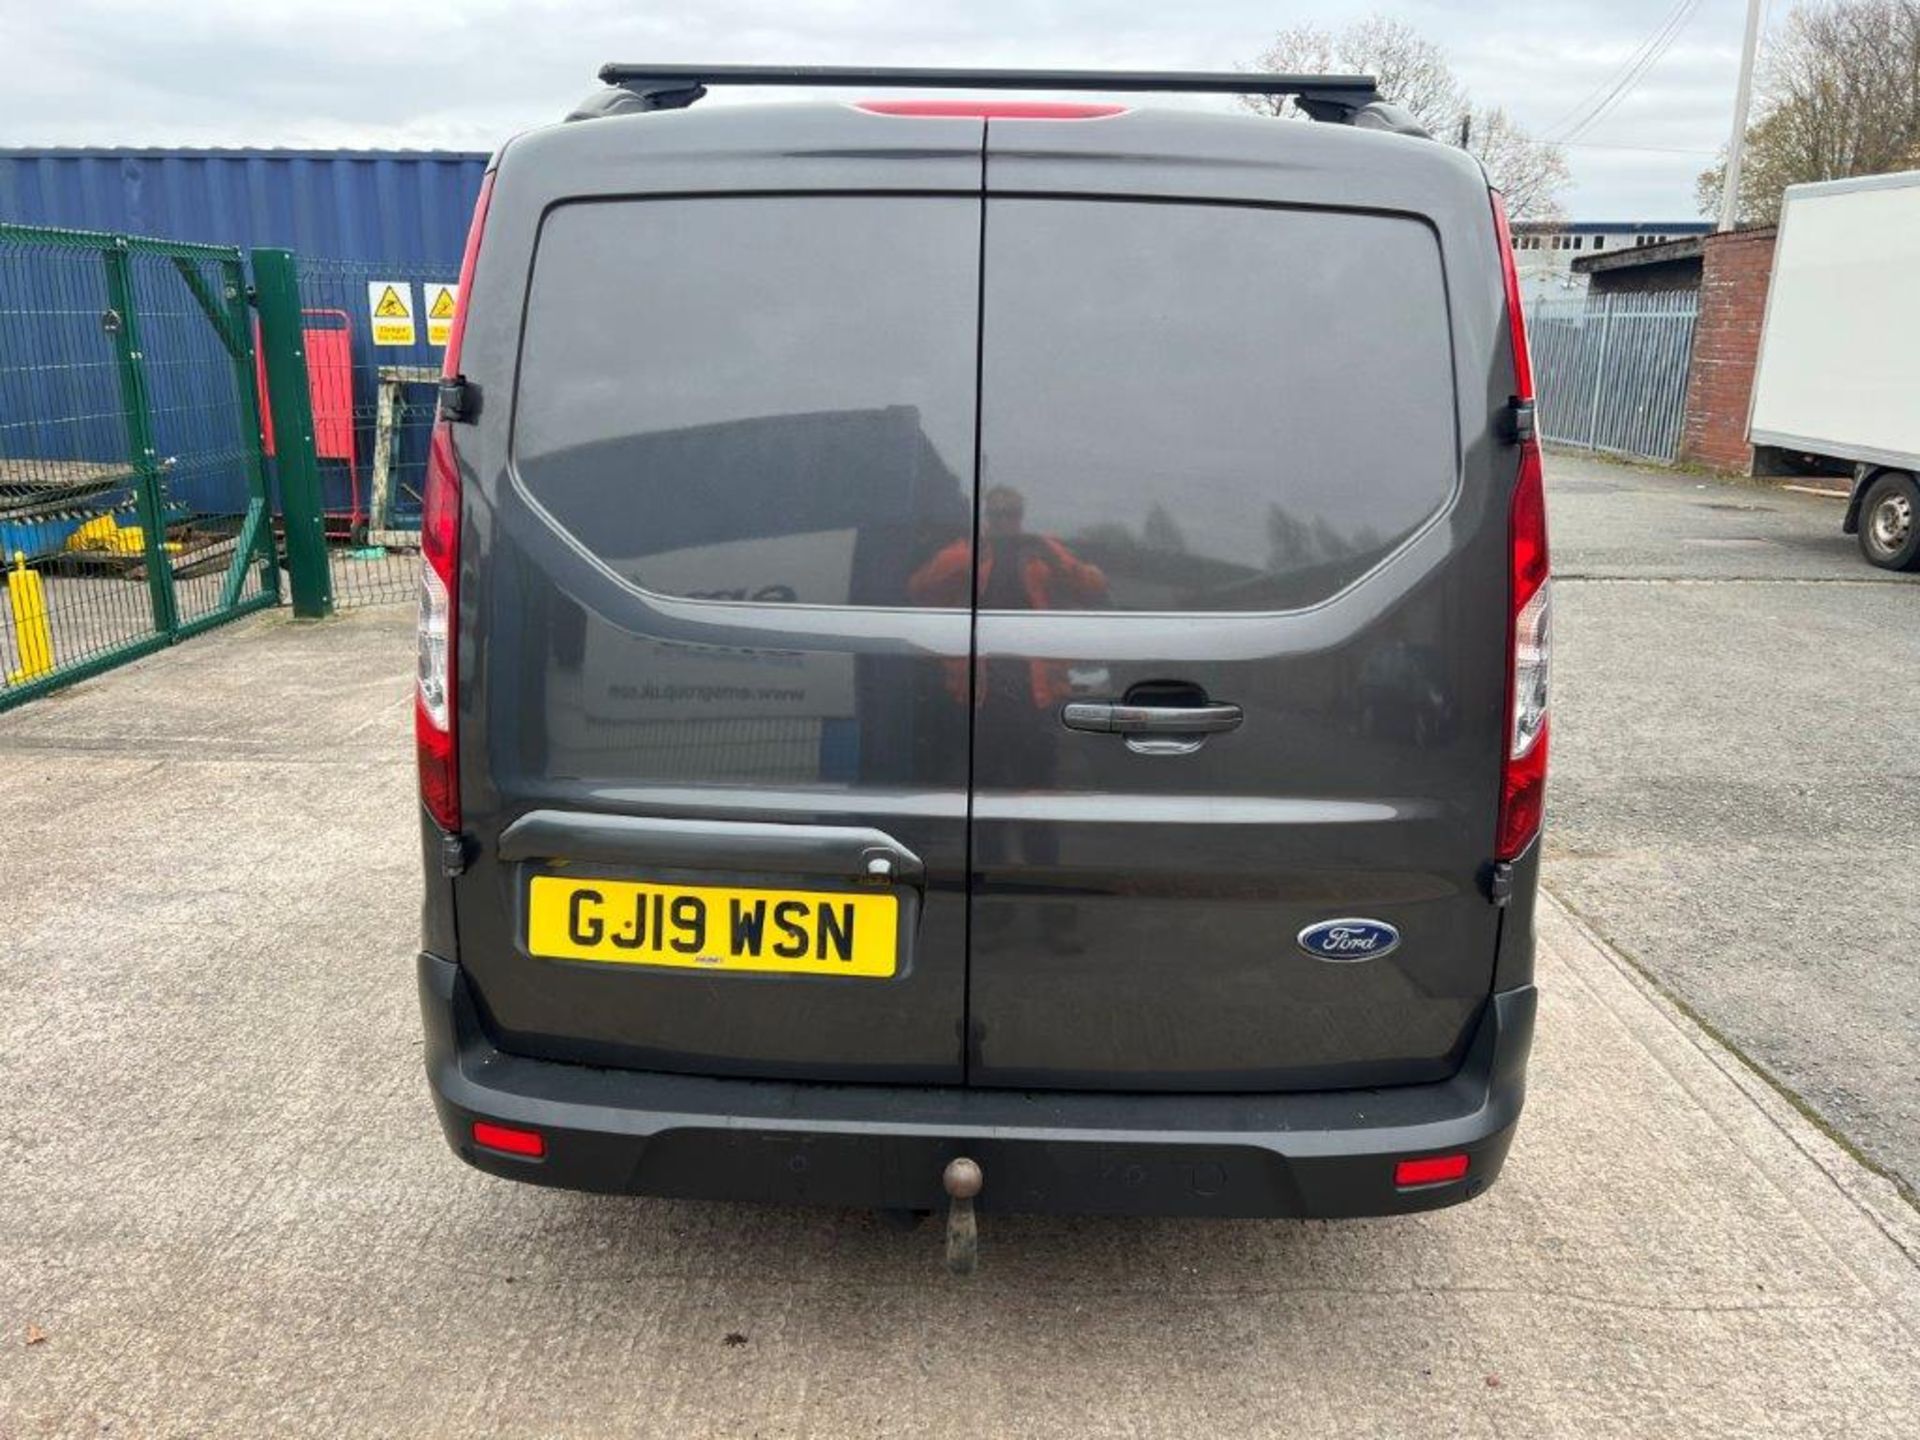 Ford Transit Connect 200 LTD TDCI Auto, Euro 6, 2019, facelift dash/screen - Image 5 of 16